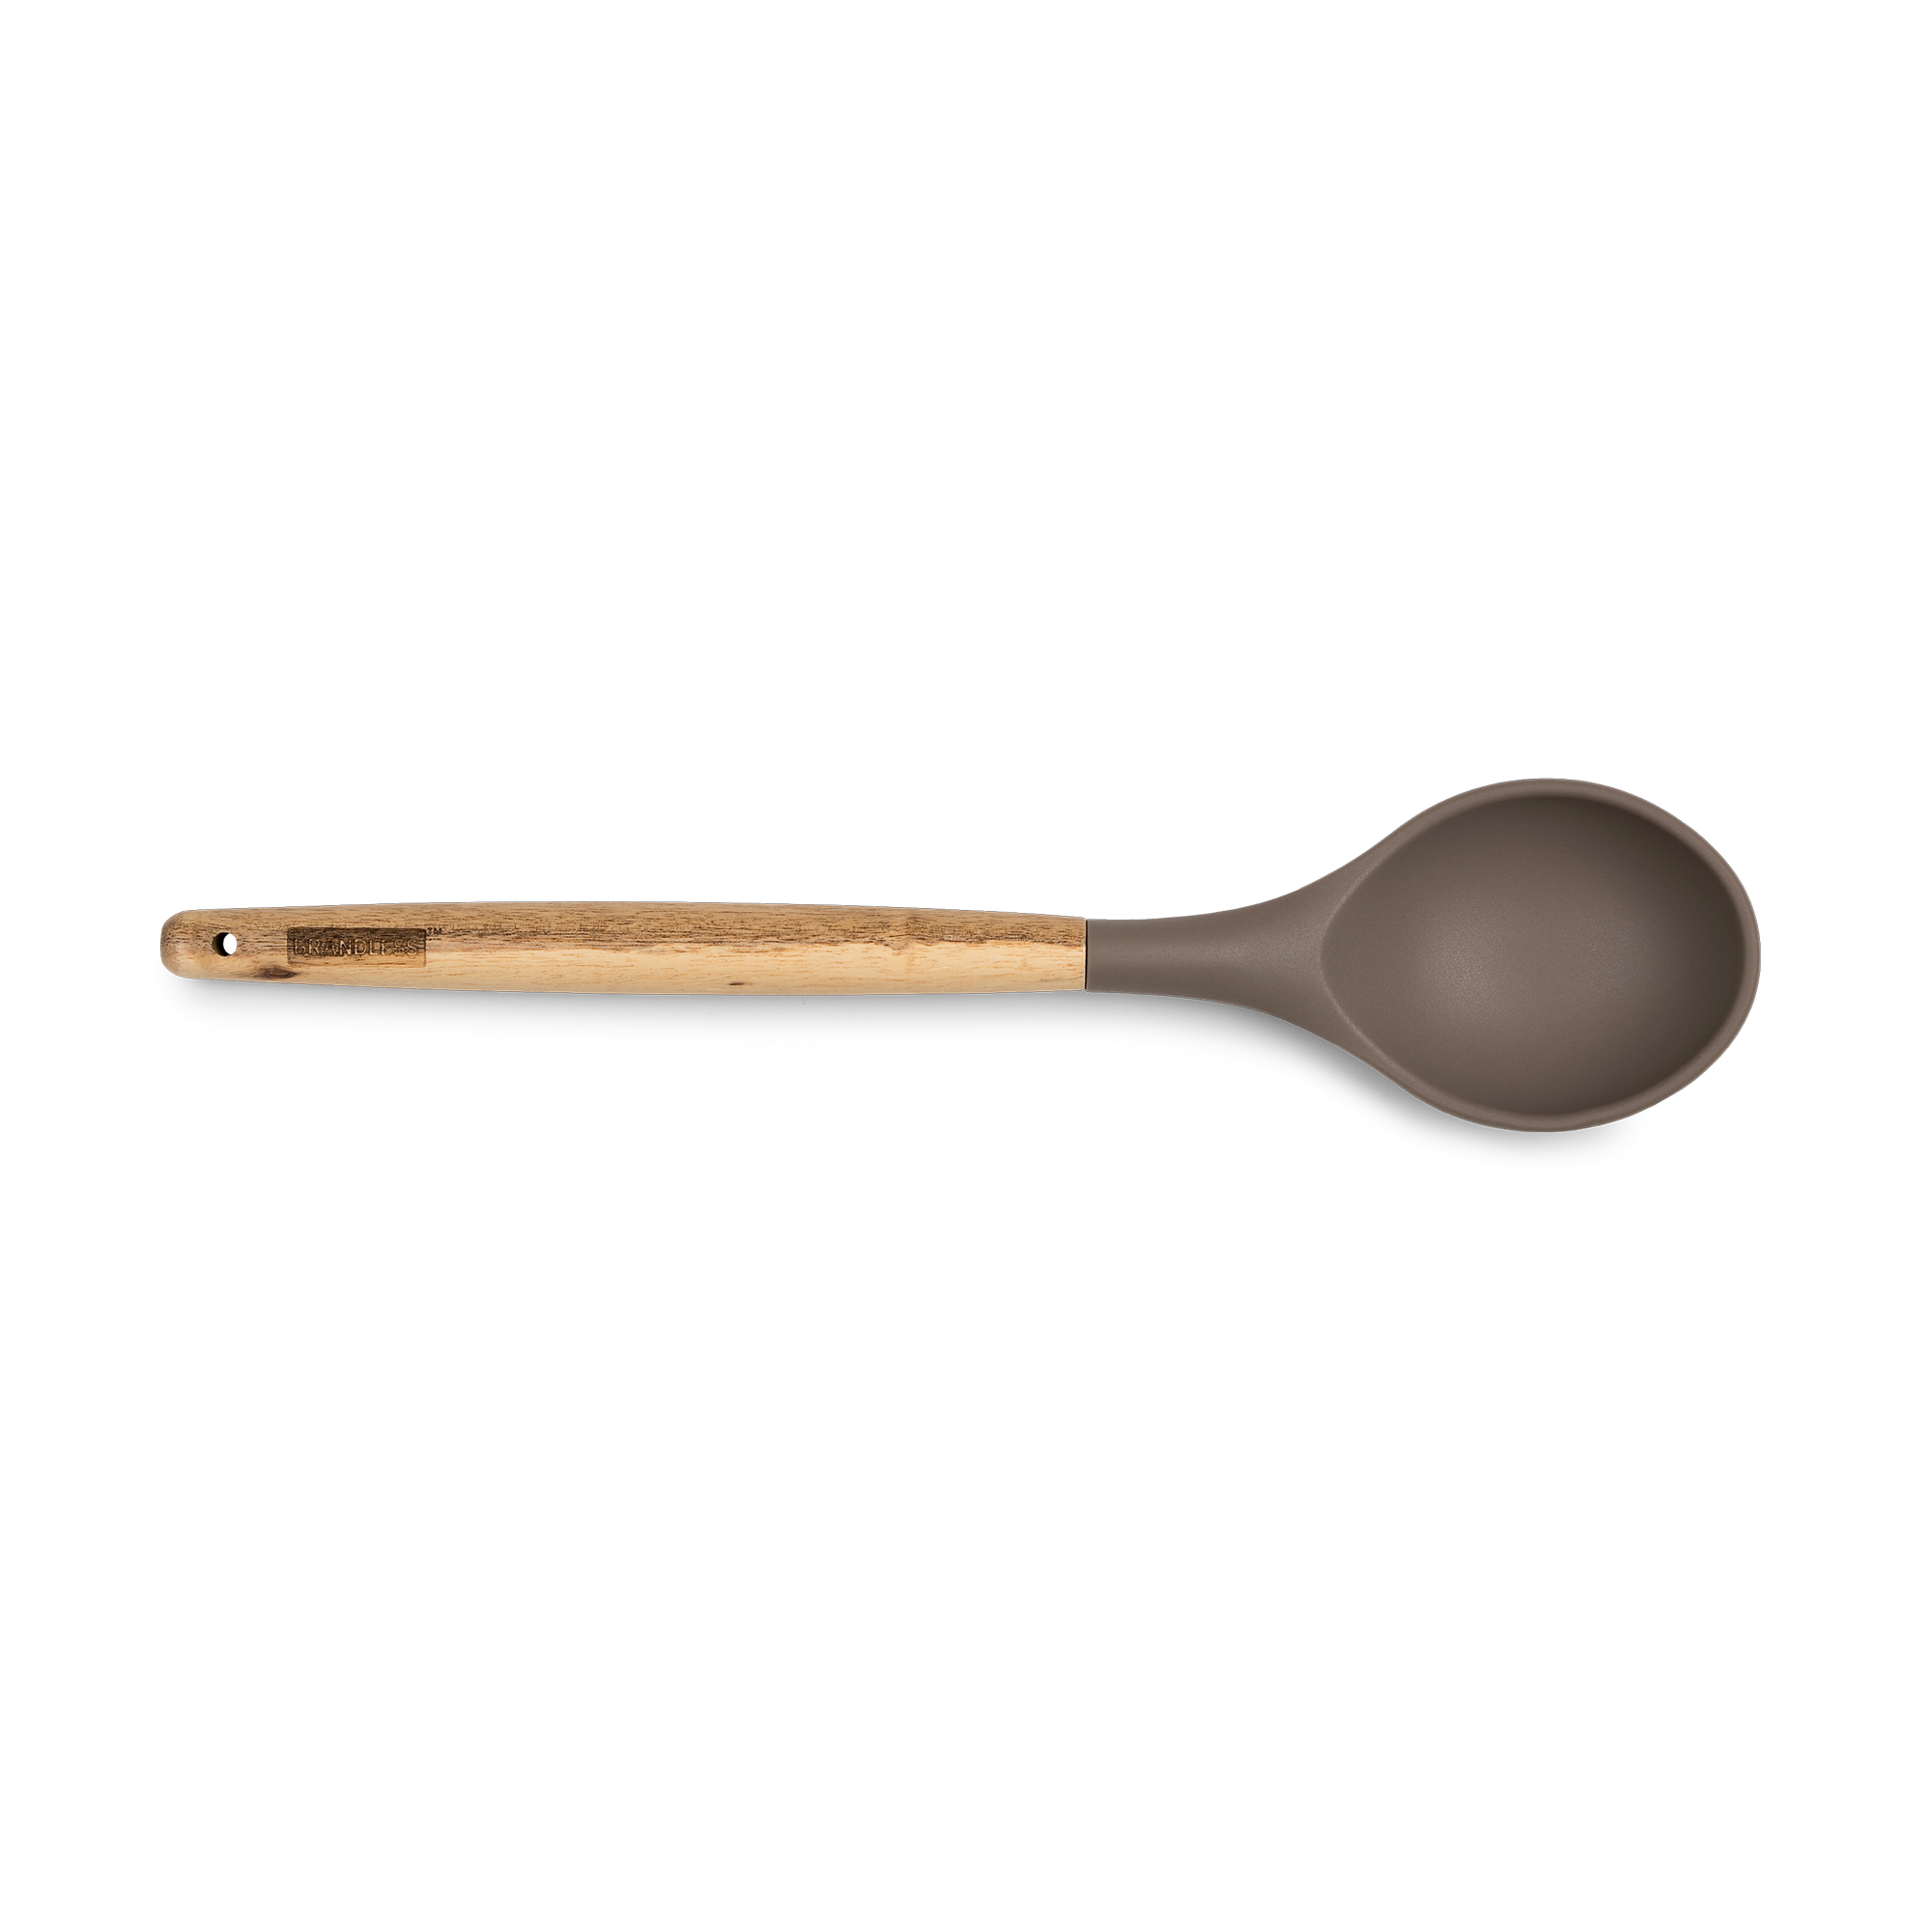 Silicone Serving Spoon - Brandless